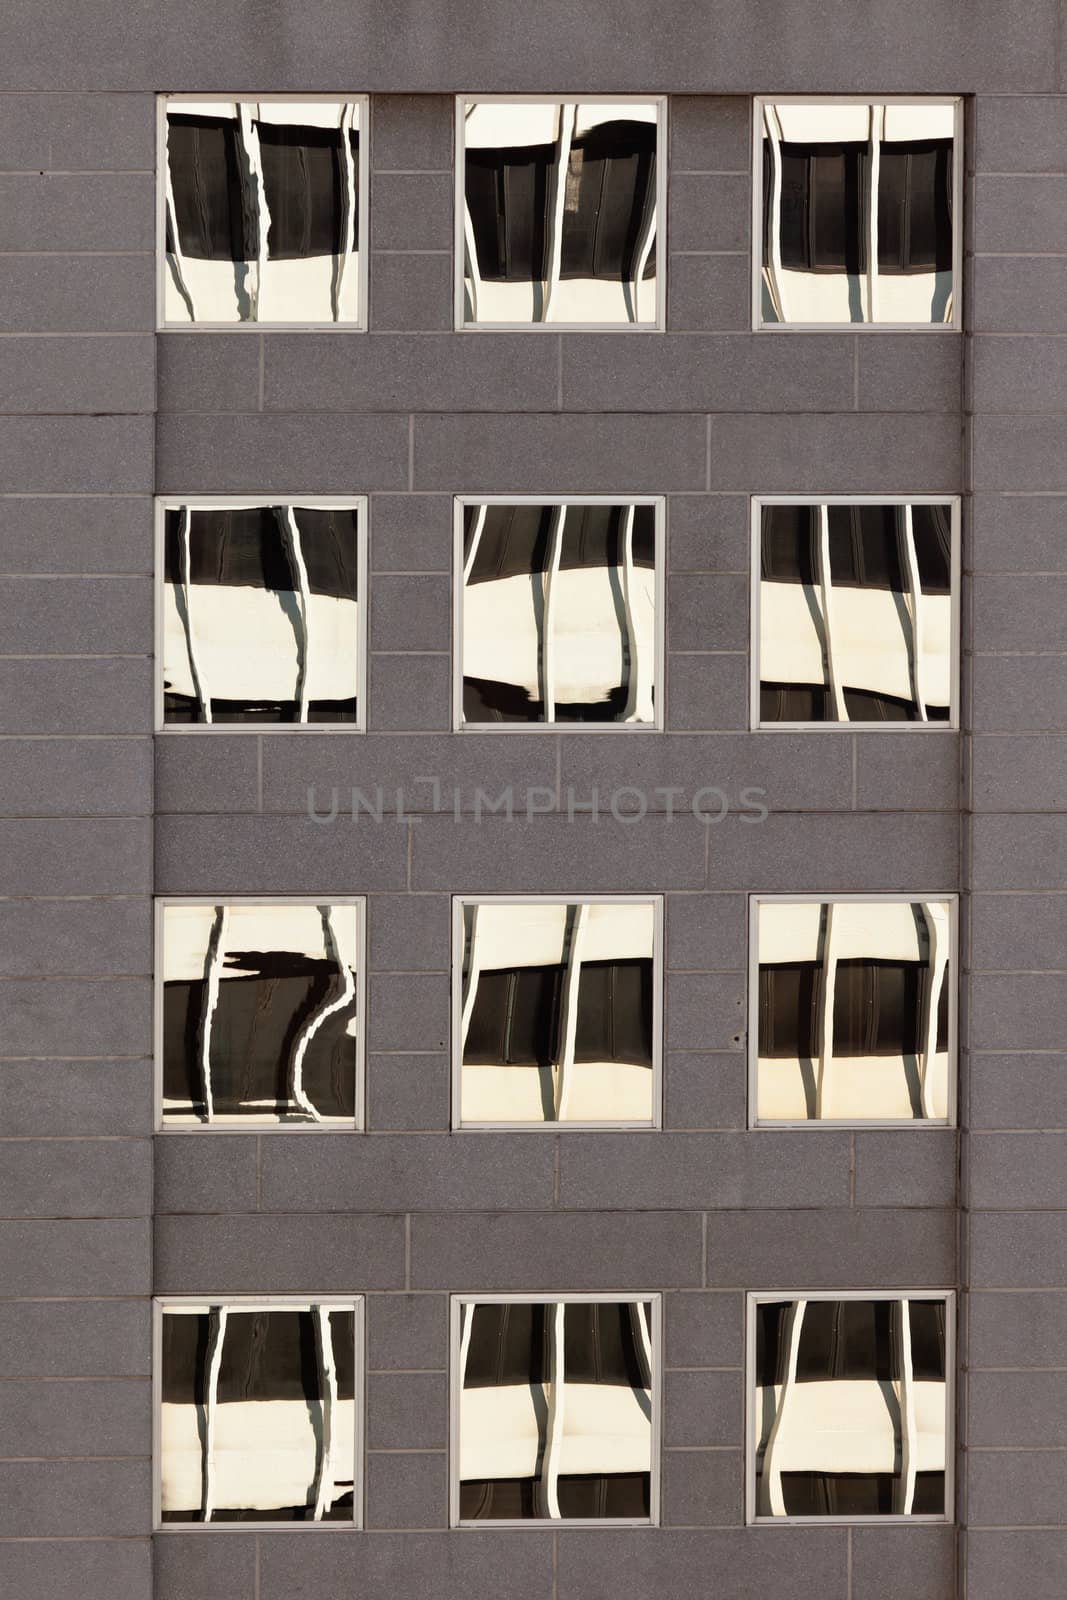 Facade with reflections of building on windows by PiLens